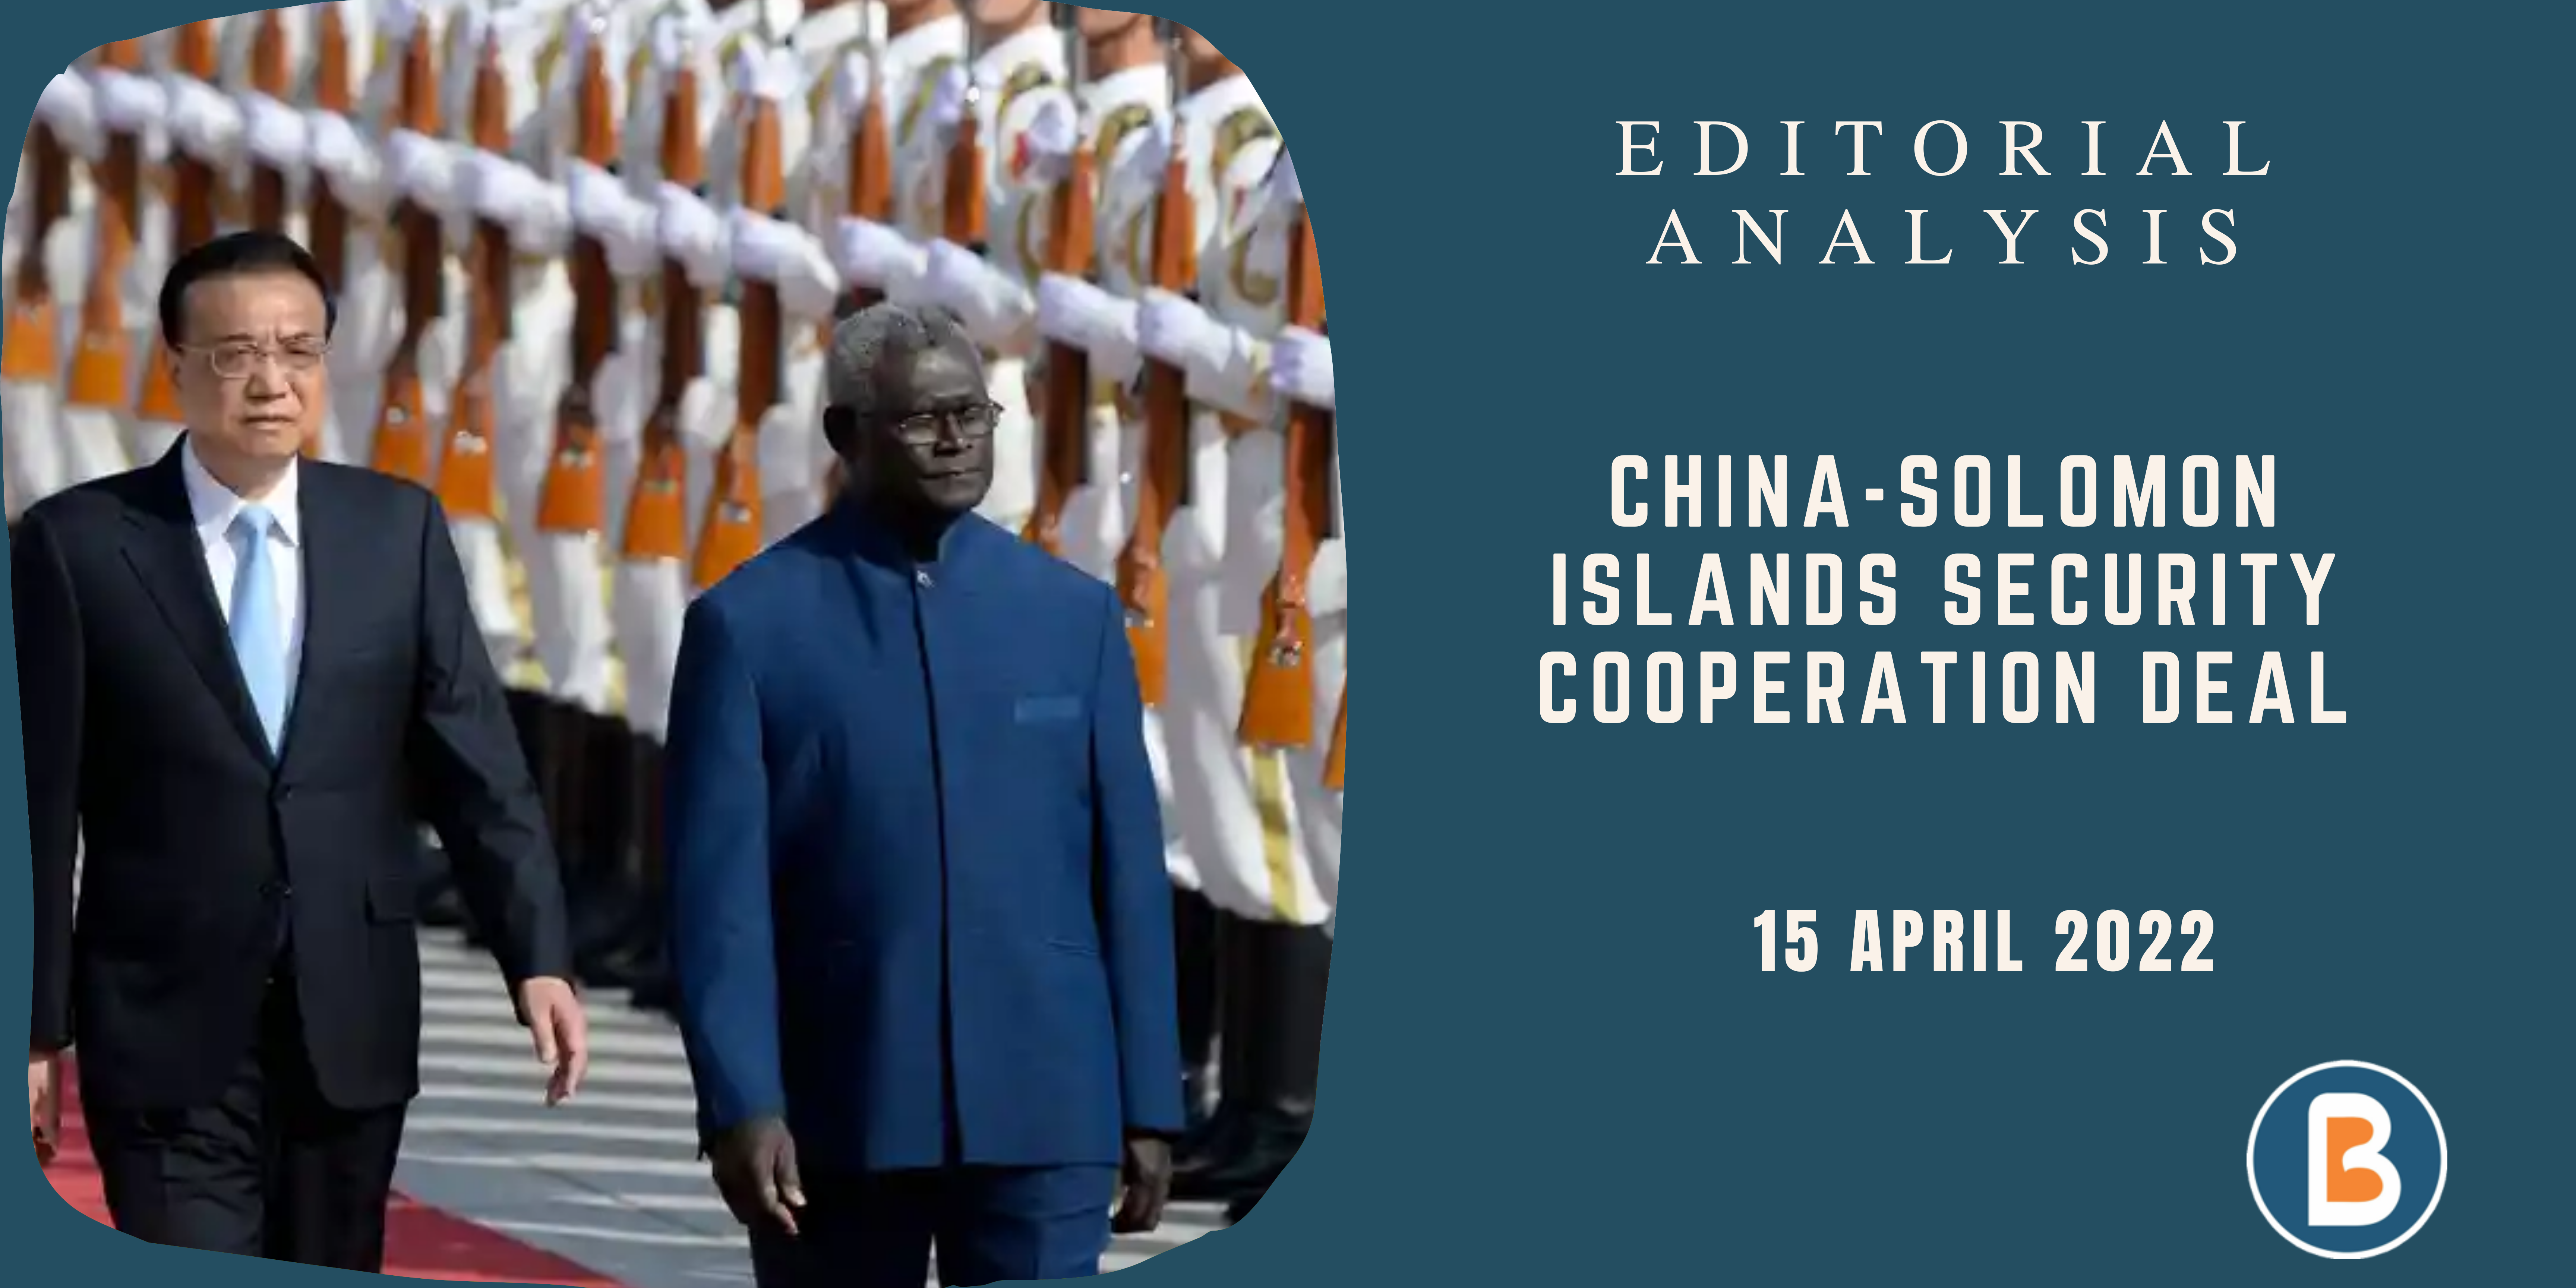 Editorial Analysis for UPSC - China-Solomon Islands security cooperation deal